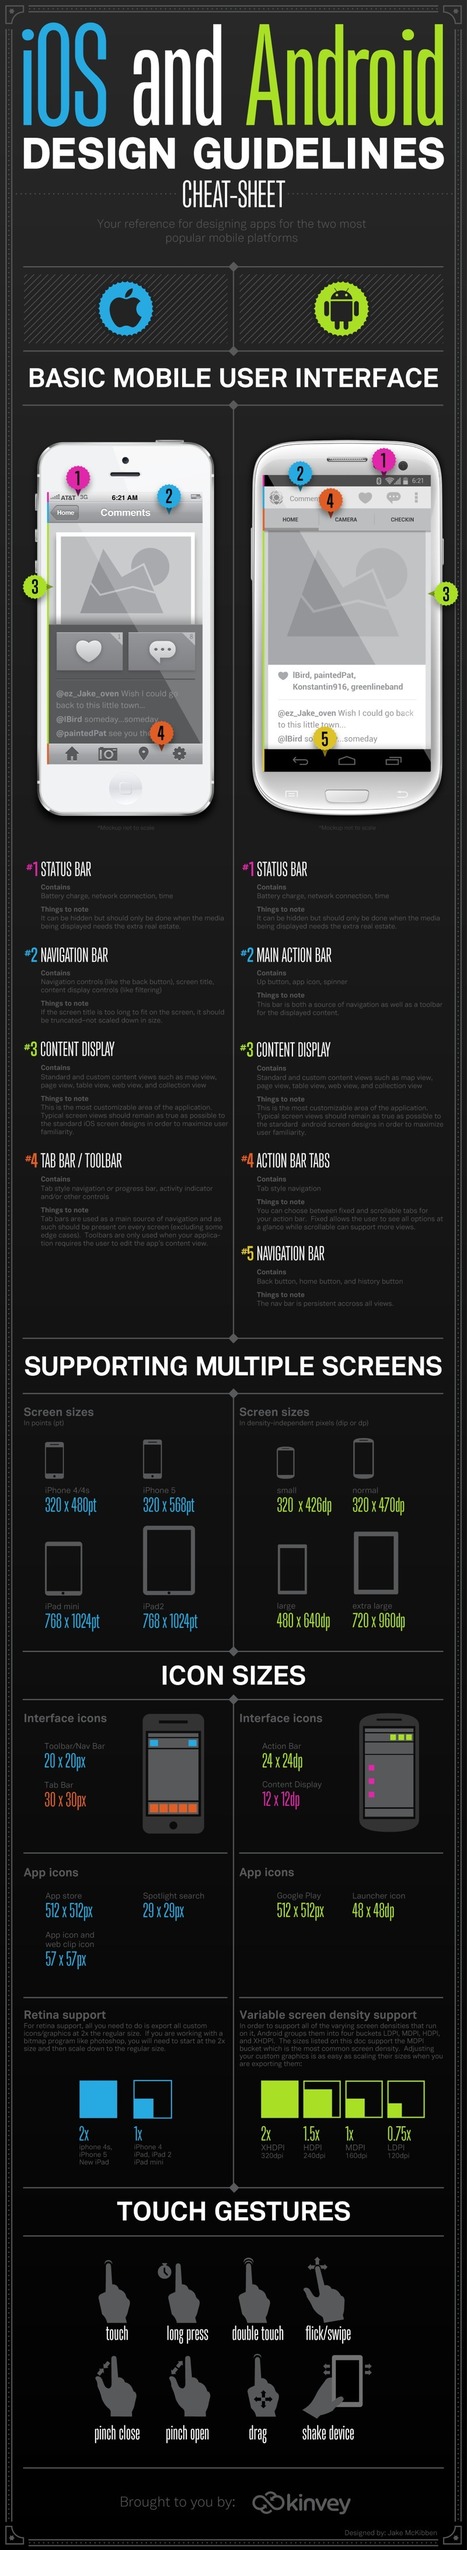 Infographic: Developers guide to iOS and Android app design | Mobile Technology | Scoop.it